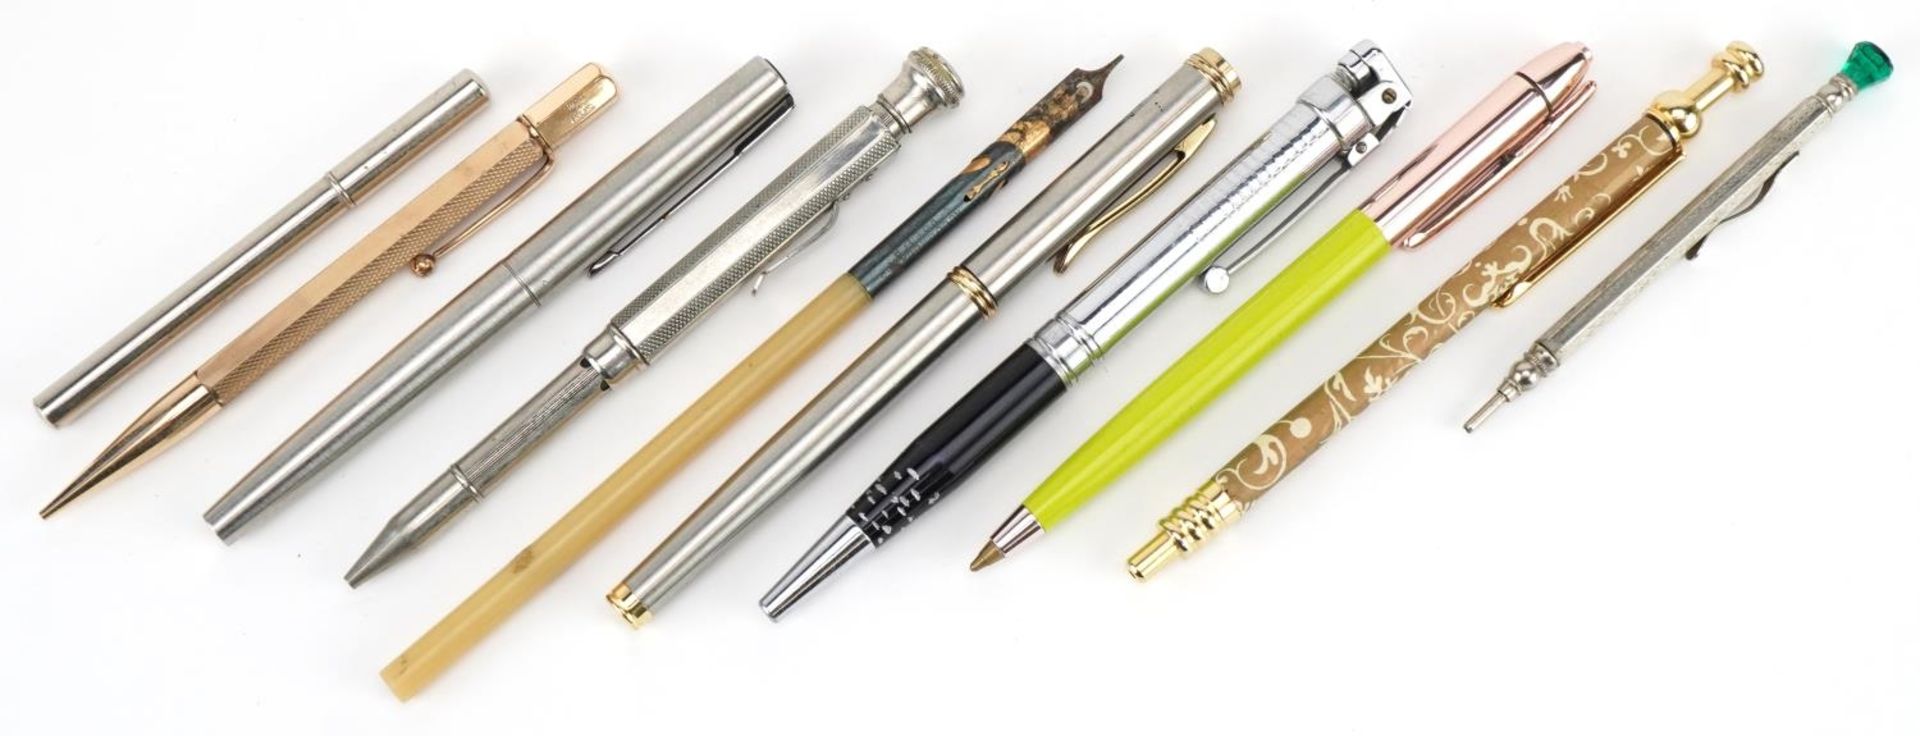 Vintage and later pens and pencils including Balita with lighter and rolled gold propelling pencil :